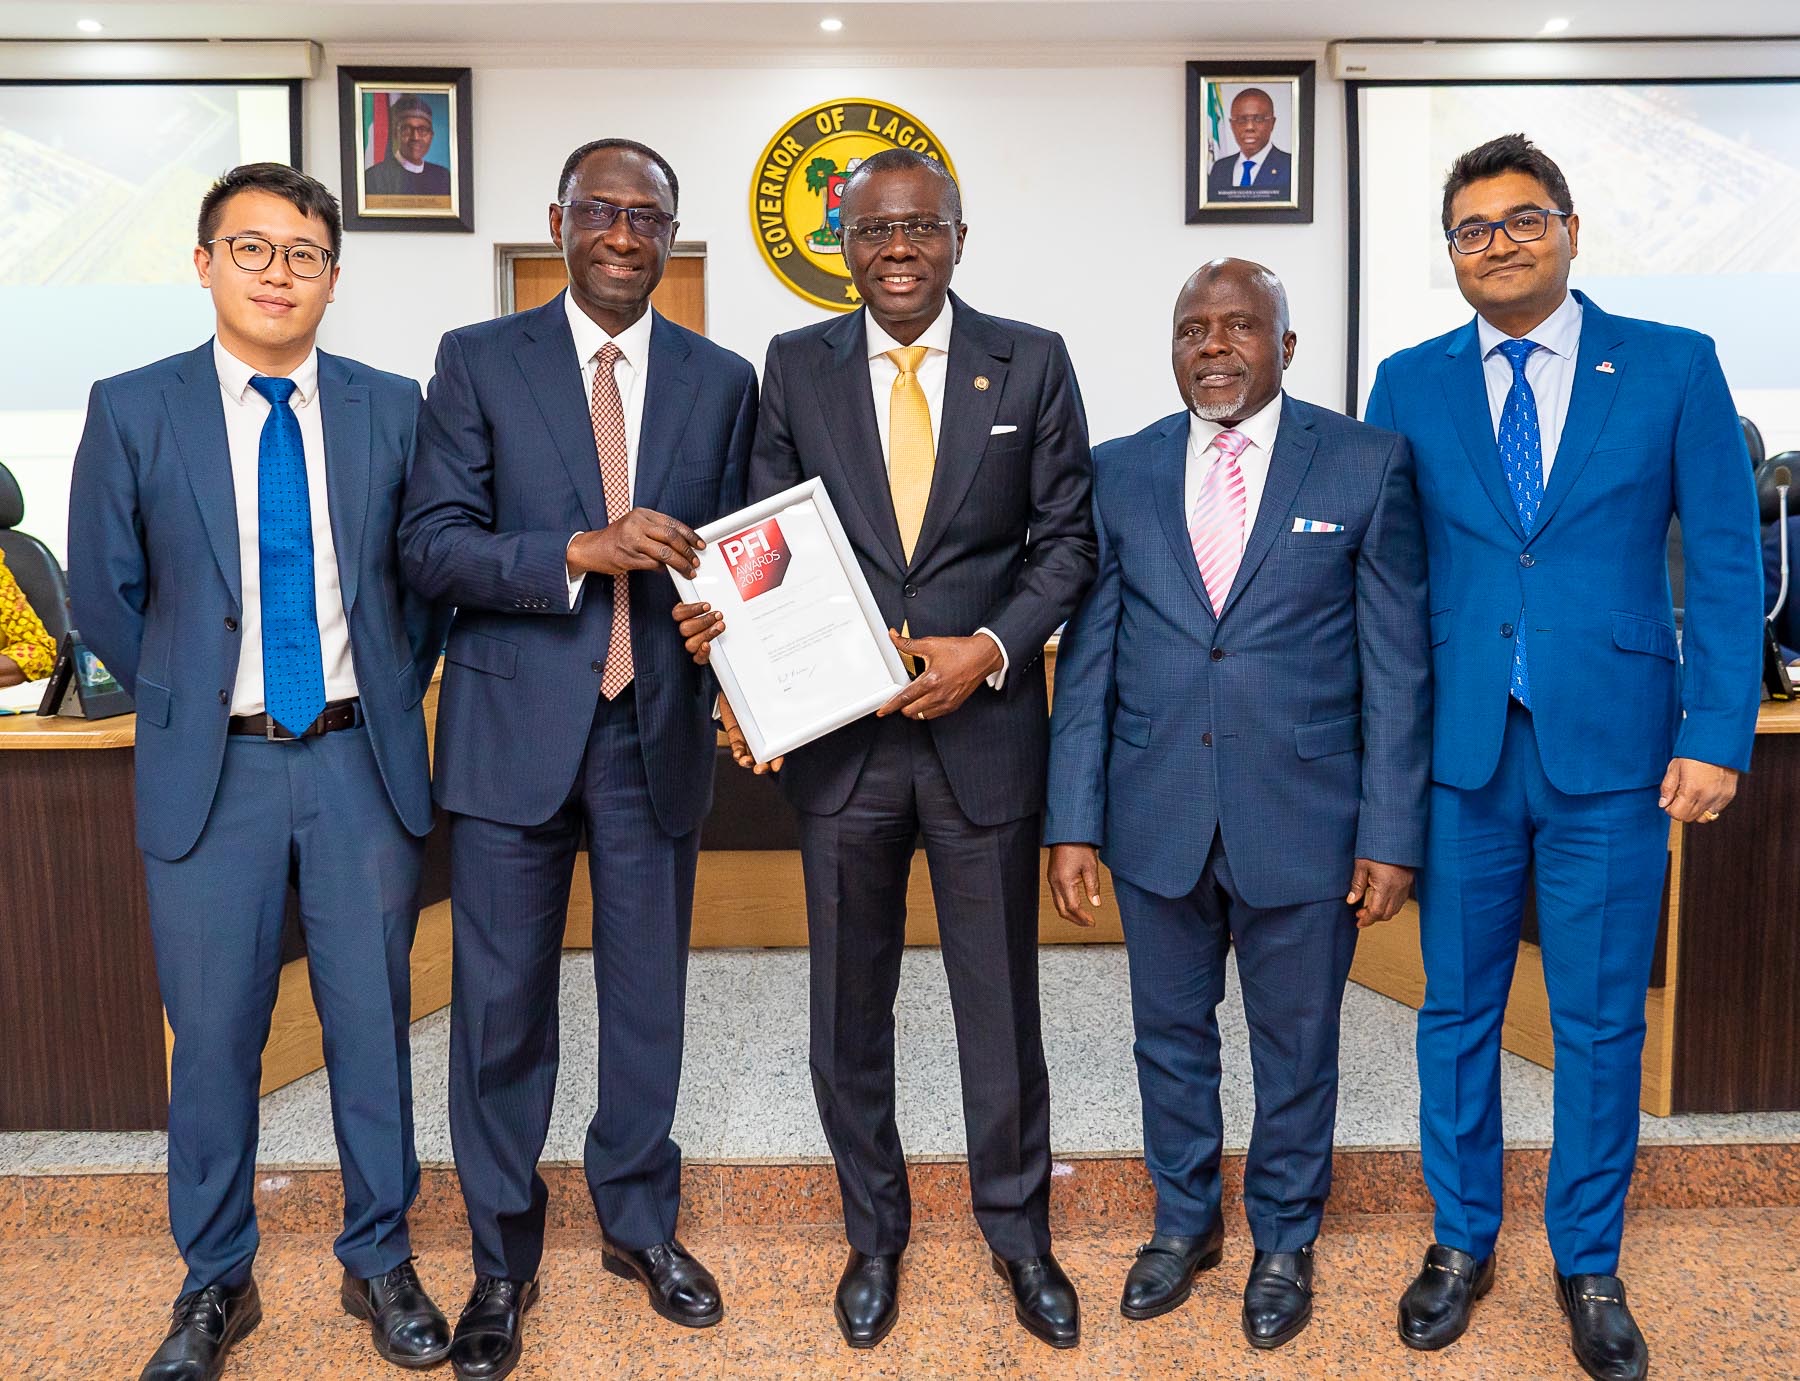  L-R: China Harbour Engineering Company, Mr. David Tianxiang; Chairman, Lekki Port, Mr. Abiodun Dabiri; Lagos State Governor, Mr. Babajide Sanwo-Olu; Director, Lekki Port, Alhaji Bode Oyedele and Tolaram Group, Mr. Dinesh Rathi during the presentation of Project Finance International (PFI) Award of African Infrastructure Deal of the Year, won by Lekki Port, at Lagos House, Alausa, Ikeja, on Tuesday, February 18, 2020.